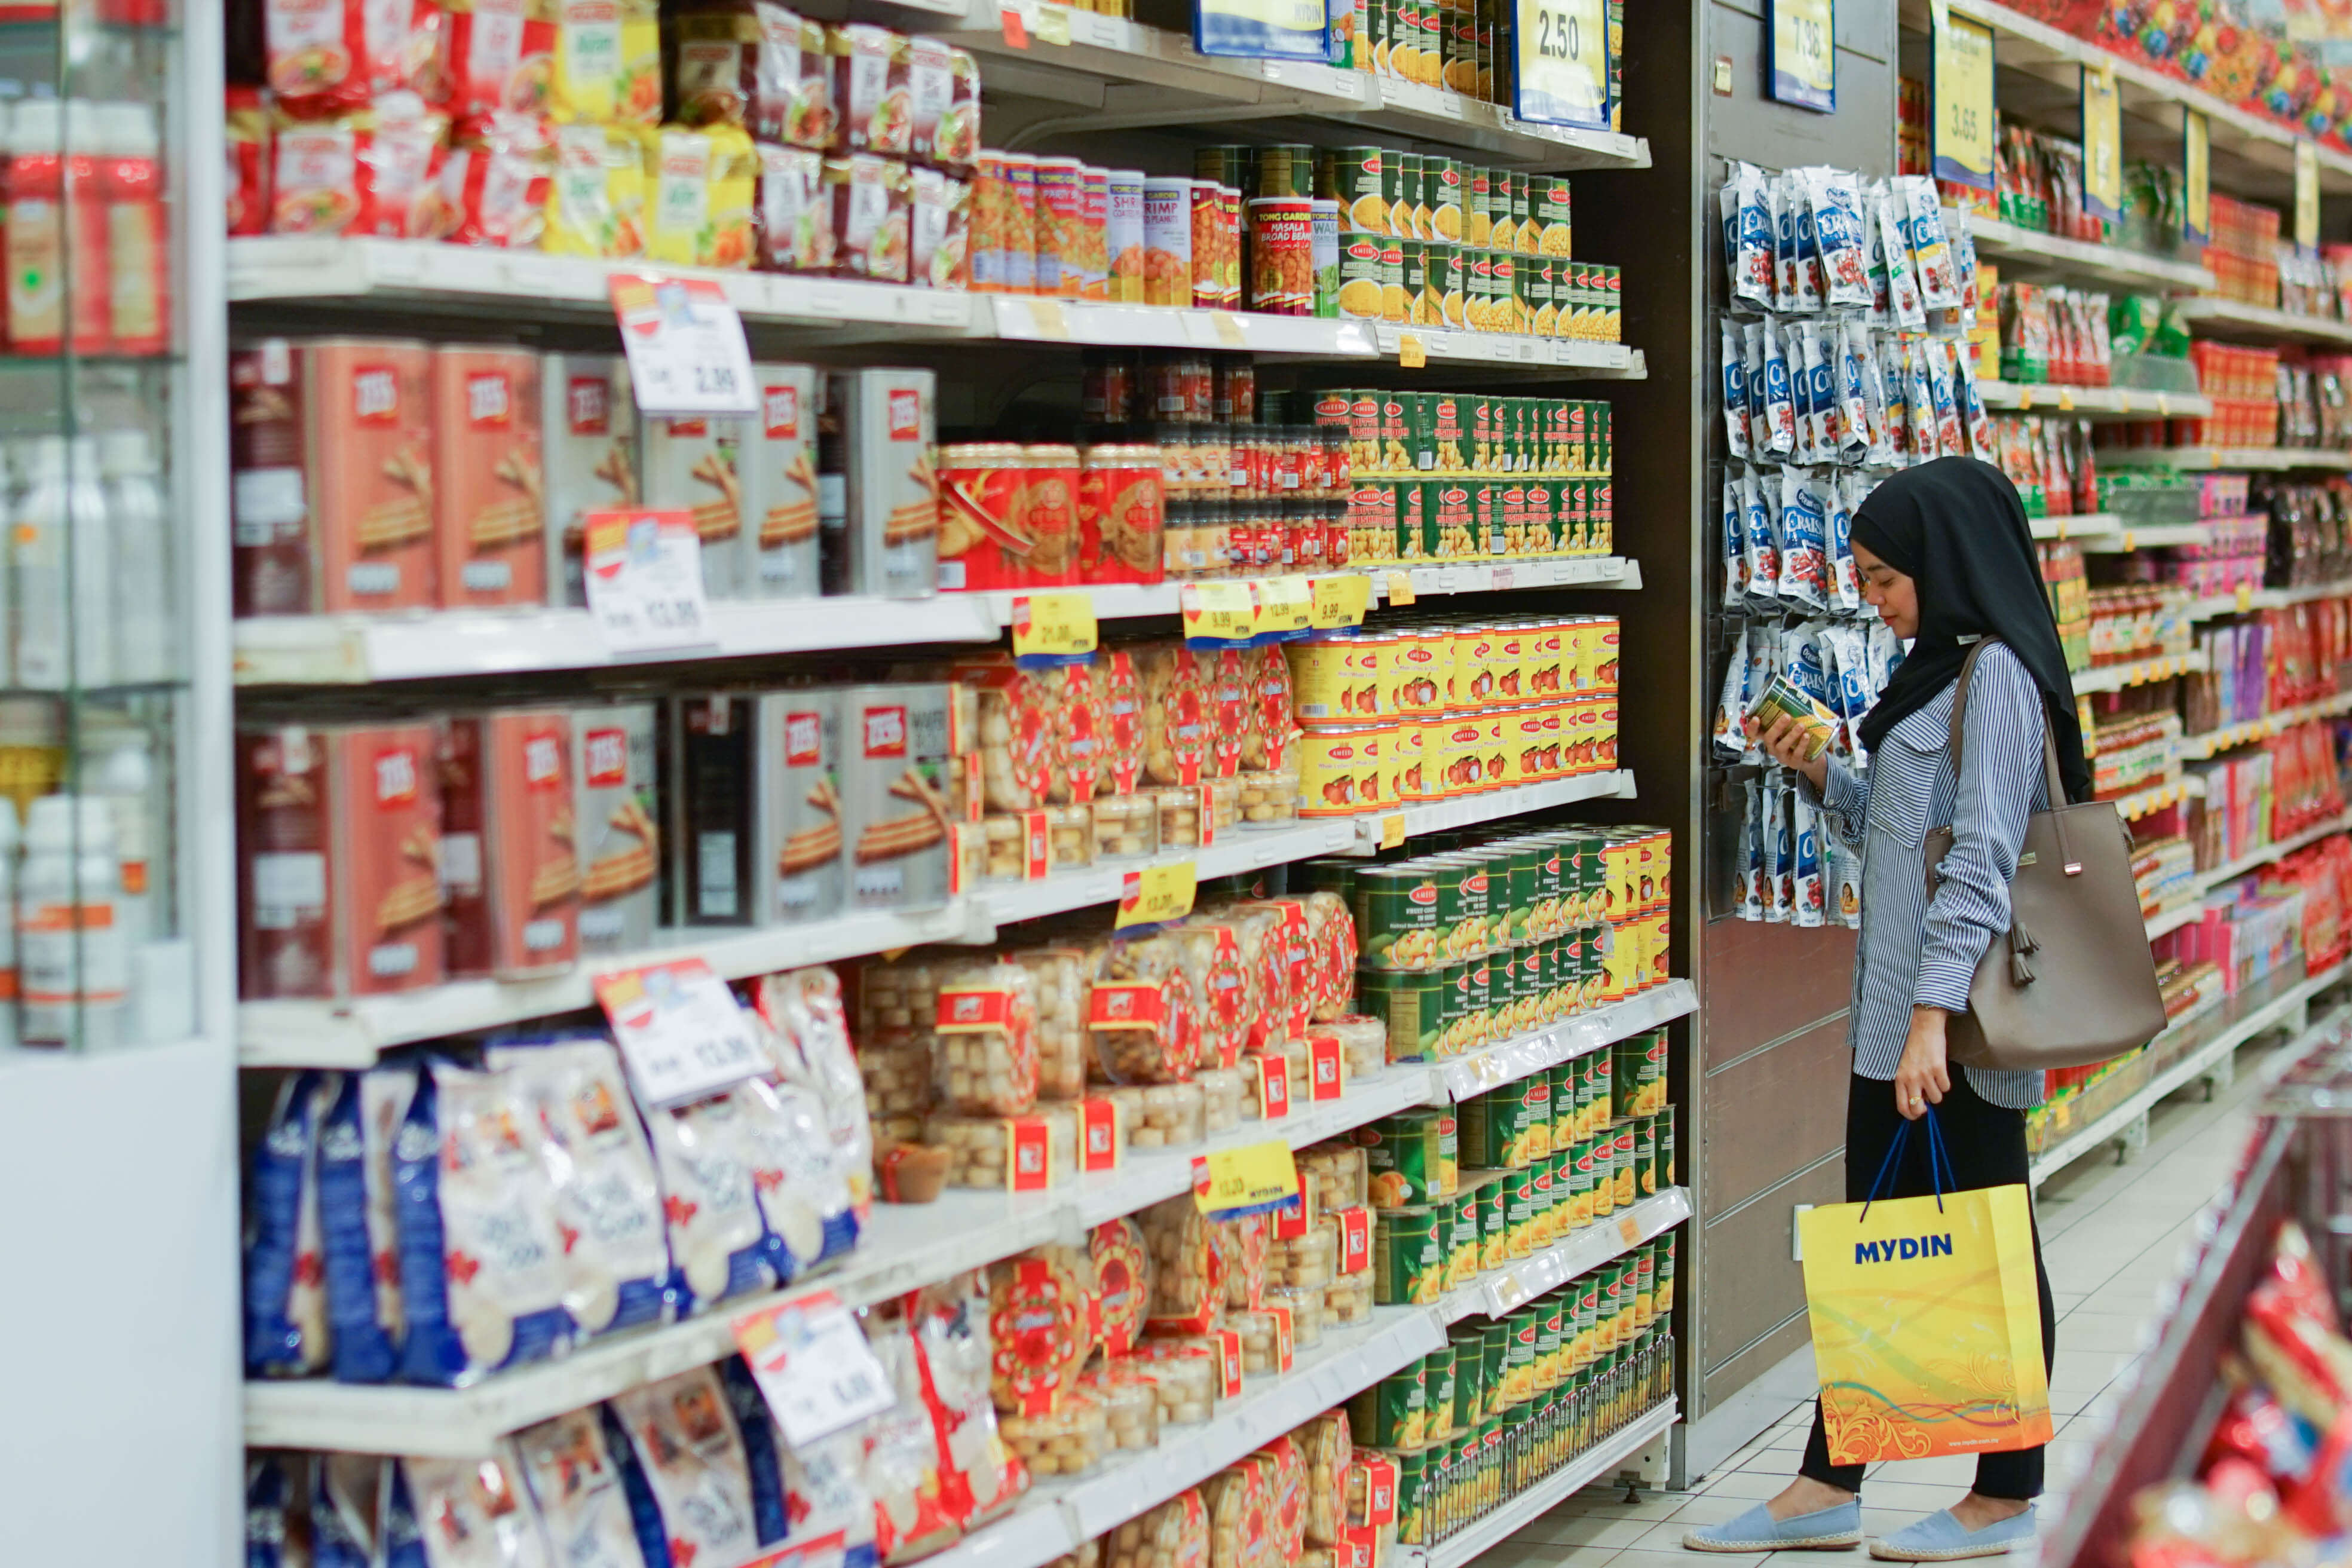 Supermarkets need to use data to make smart decisions. Source: Mydin